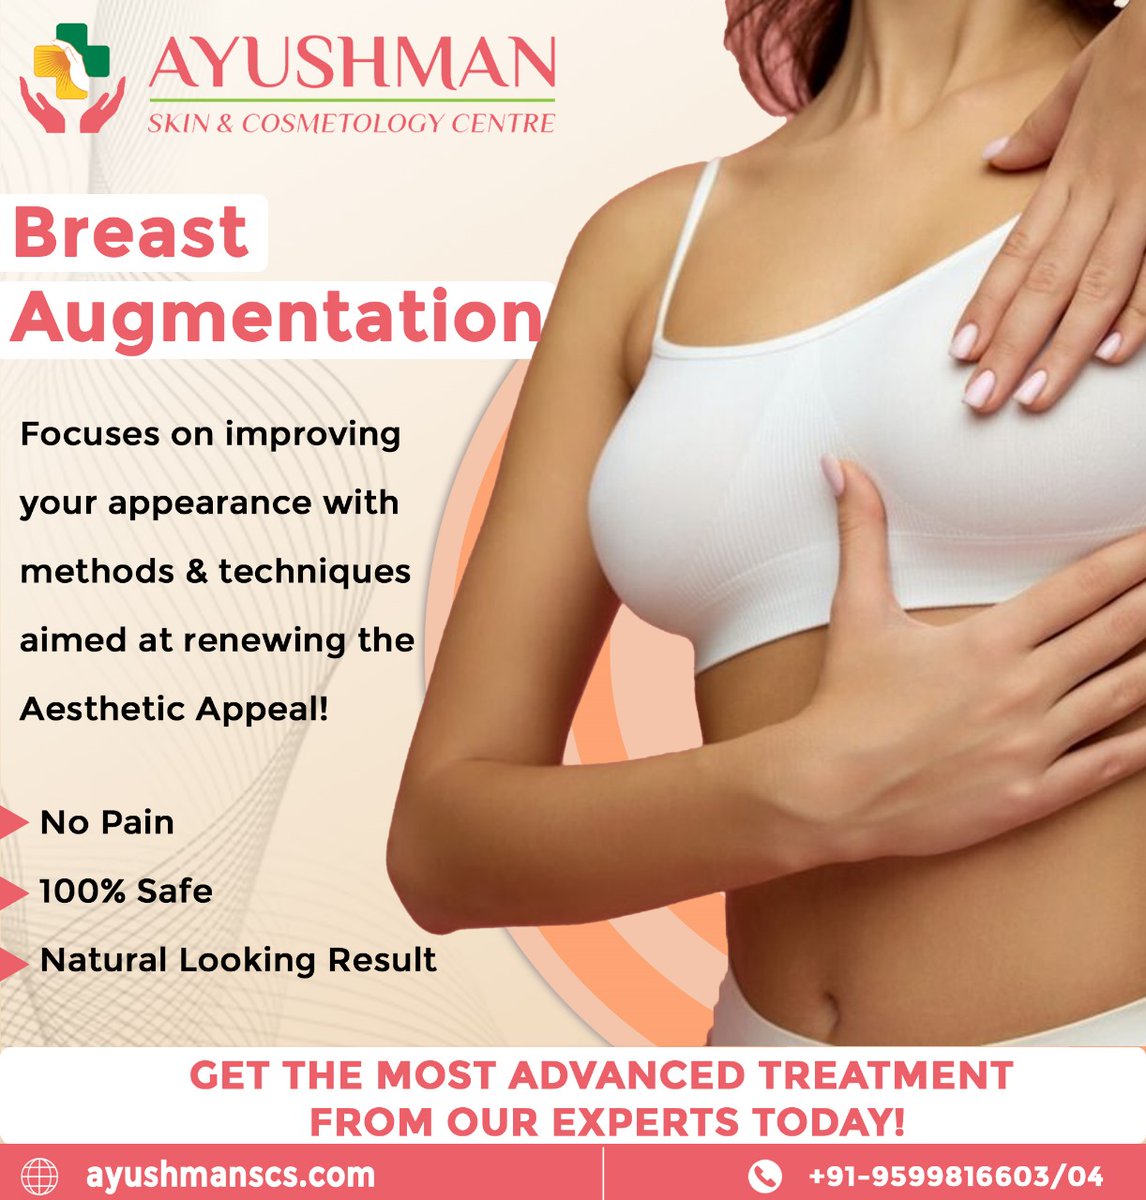 Every body is beautiful. ✨ 

Breast augmentation is a personal choice to enhance what you already have. 

We can help you achieve a look you love. 
.
.
.
Visit- ayushmanscs.com
#breast #augmentation #breastimplant  #breastenlargement #breastenhancement #esthetician